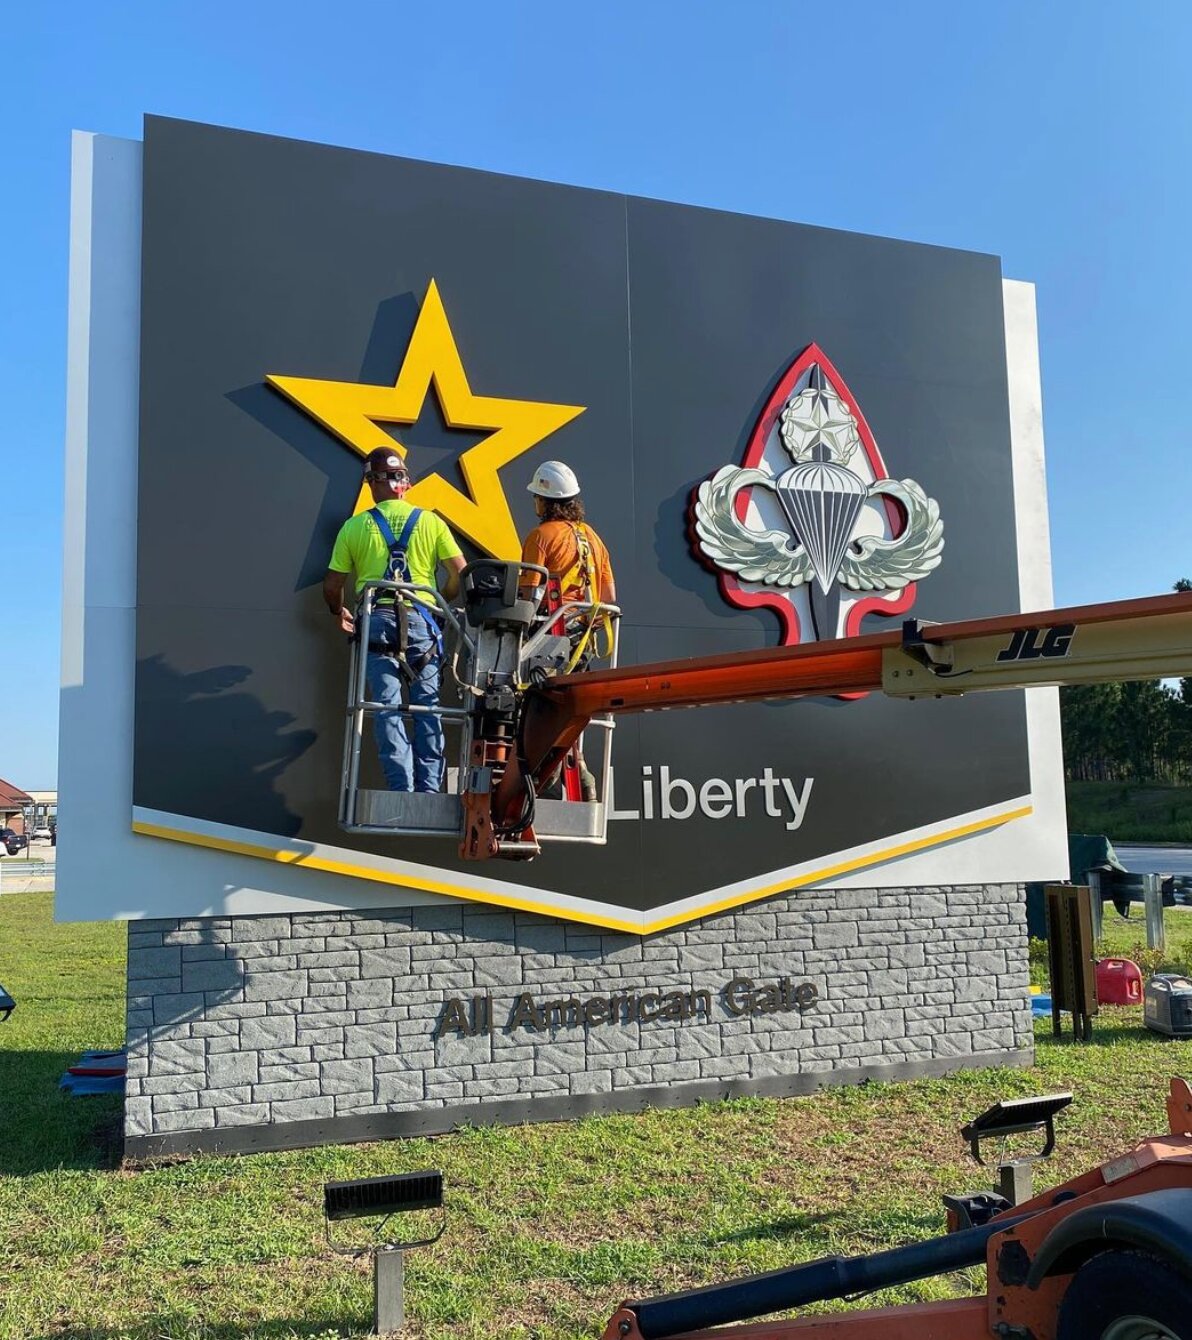 Workers put the final touches on one of the major access point signs at Fort Liberty.